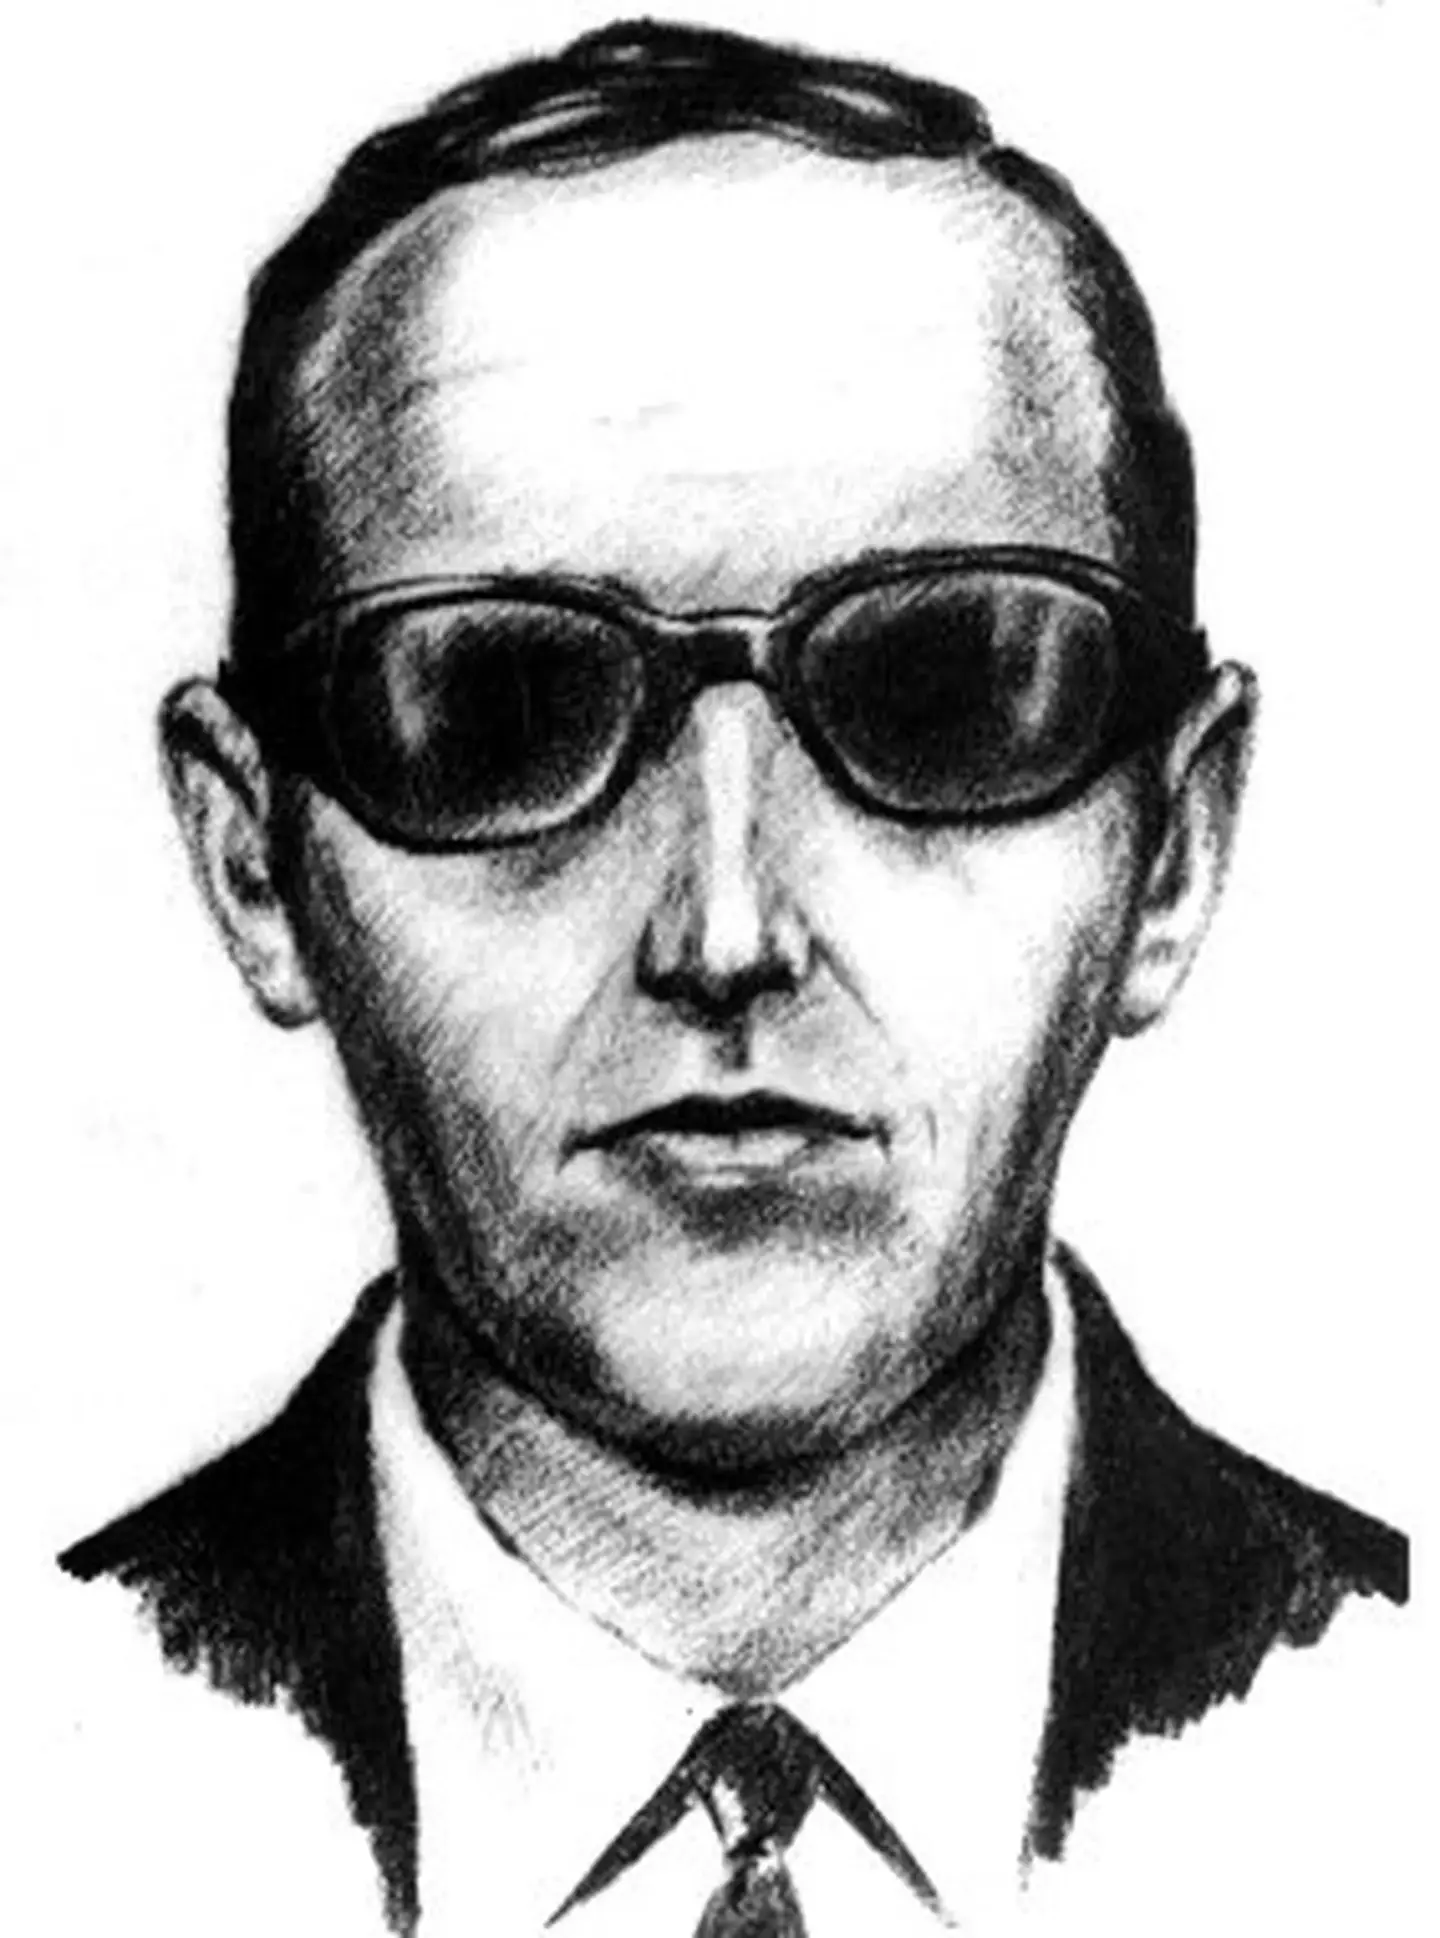 An FBI drawing of what DB Cooper might look like.